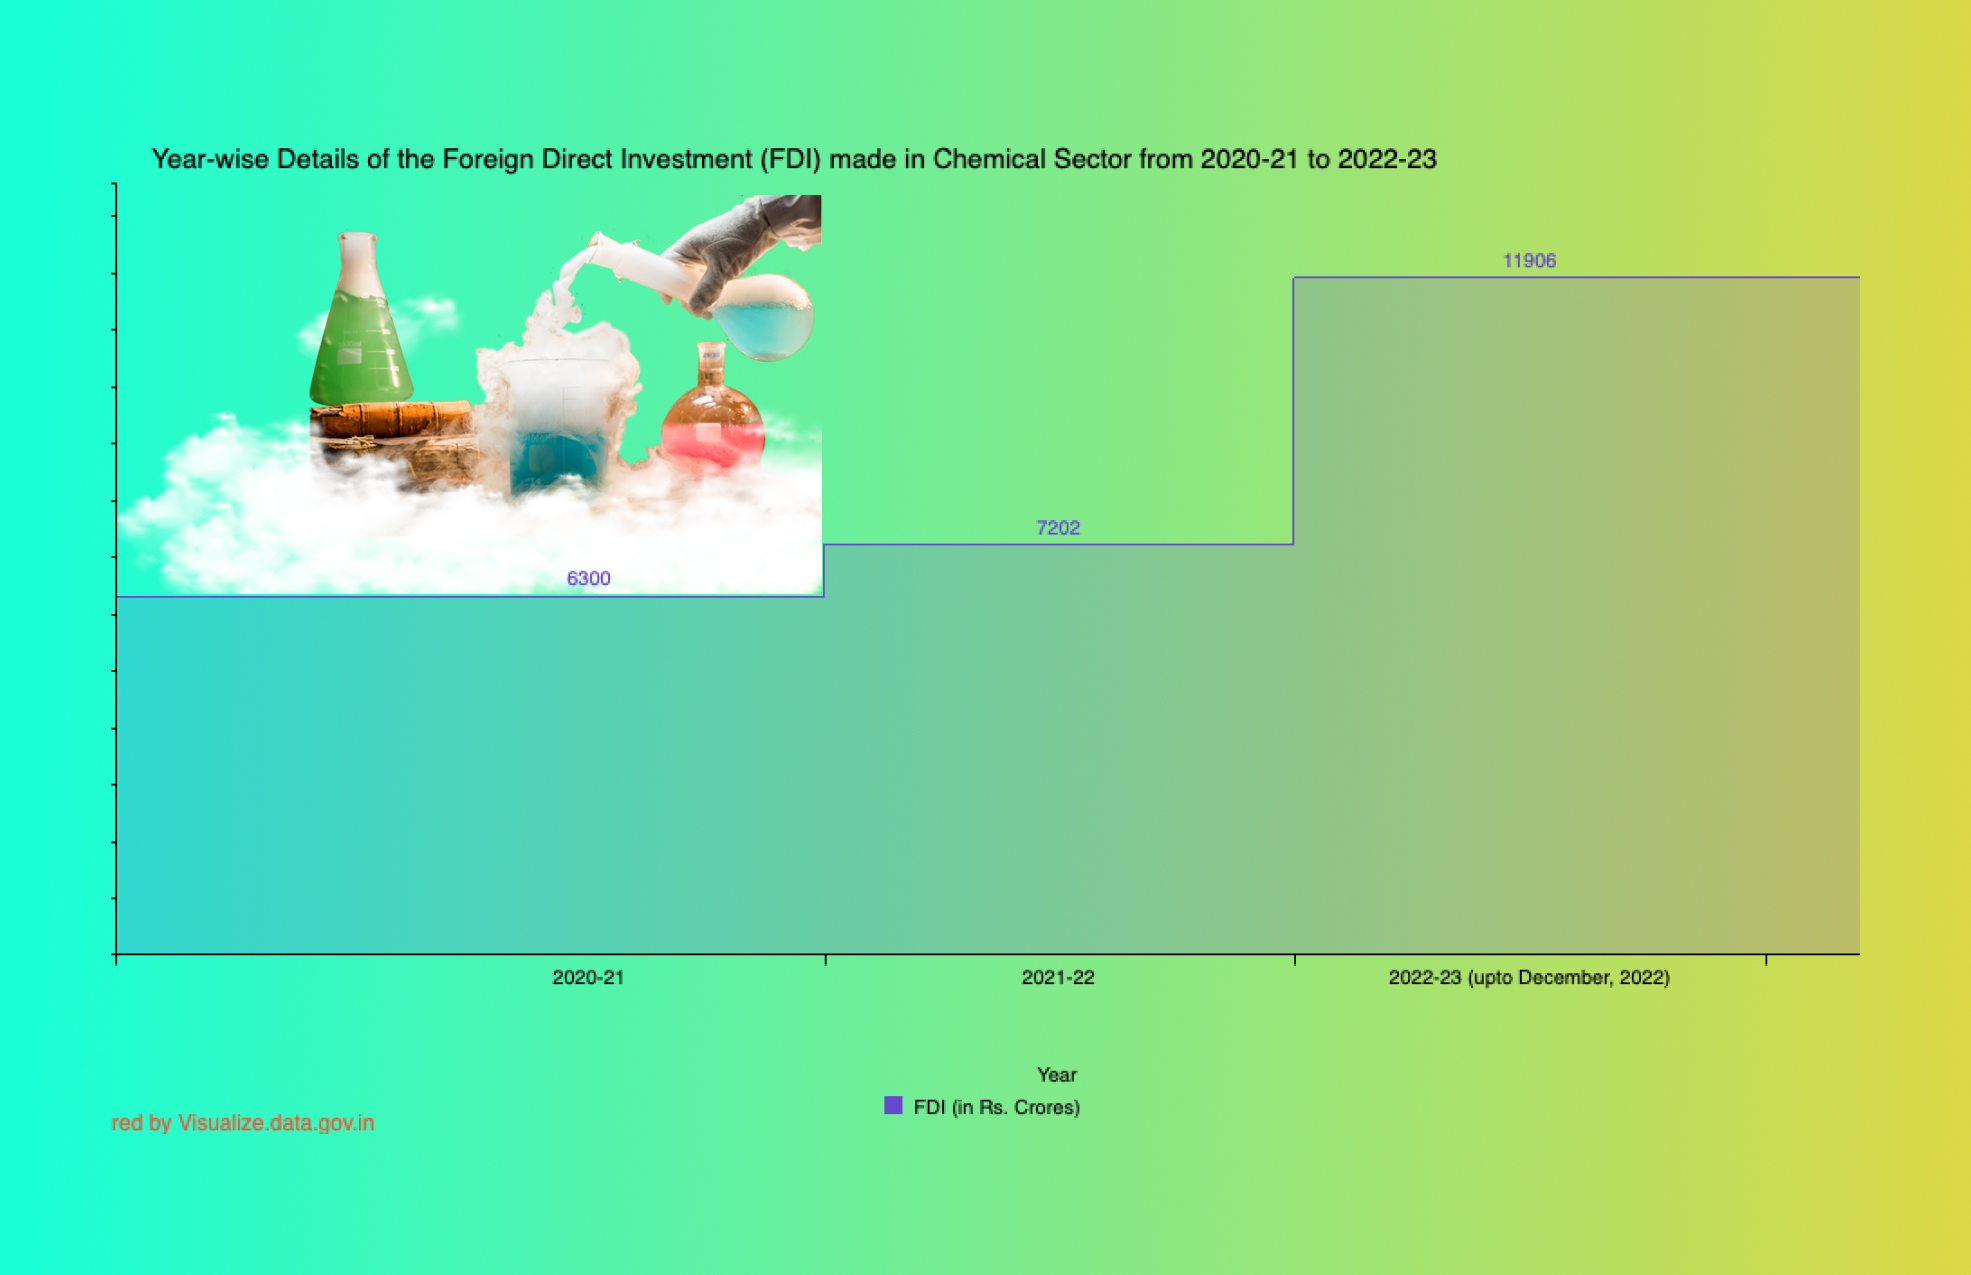 Banner of Year-wise Details of the Foreign Direct Investment (FDI) made in Chemical Sector from 2020-21 to 2022-23